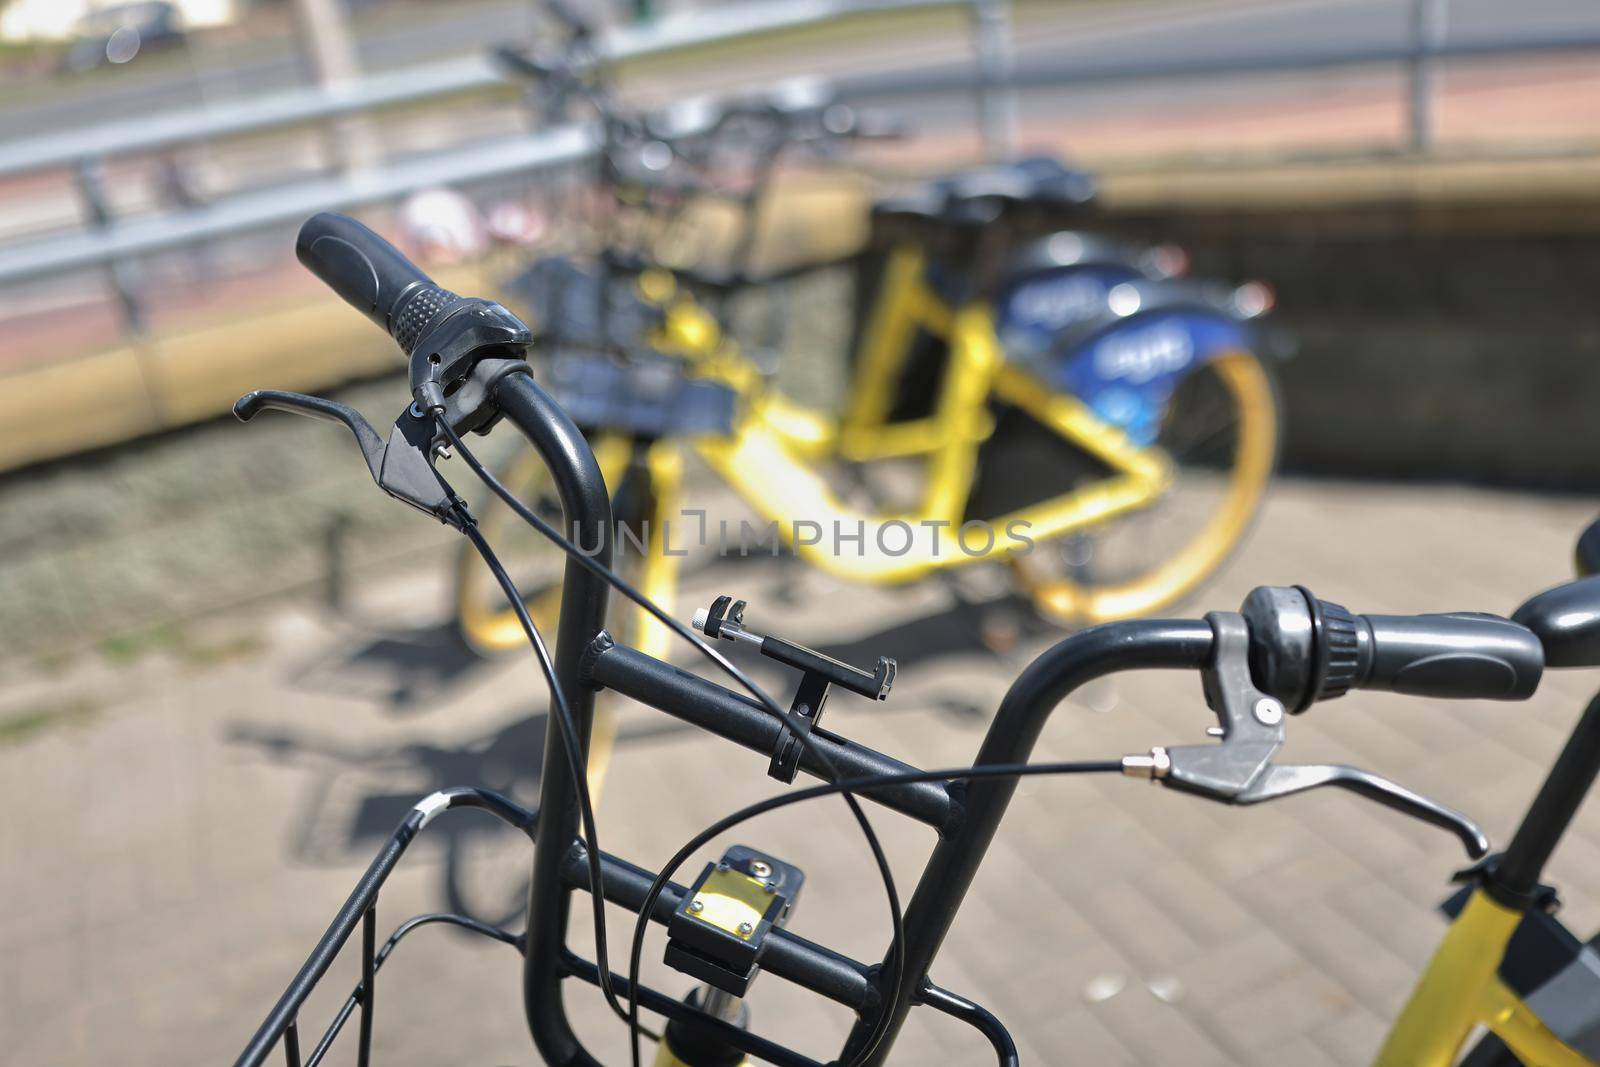 Rent bikes using code, city station with vehicle, take for street ride by kuprevich